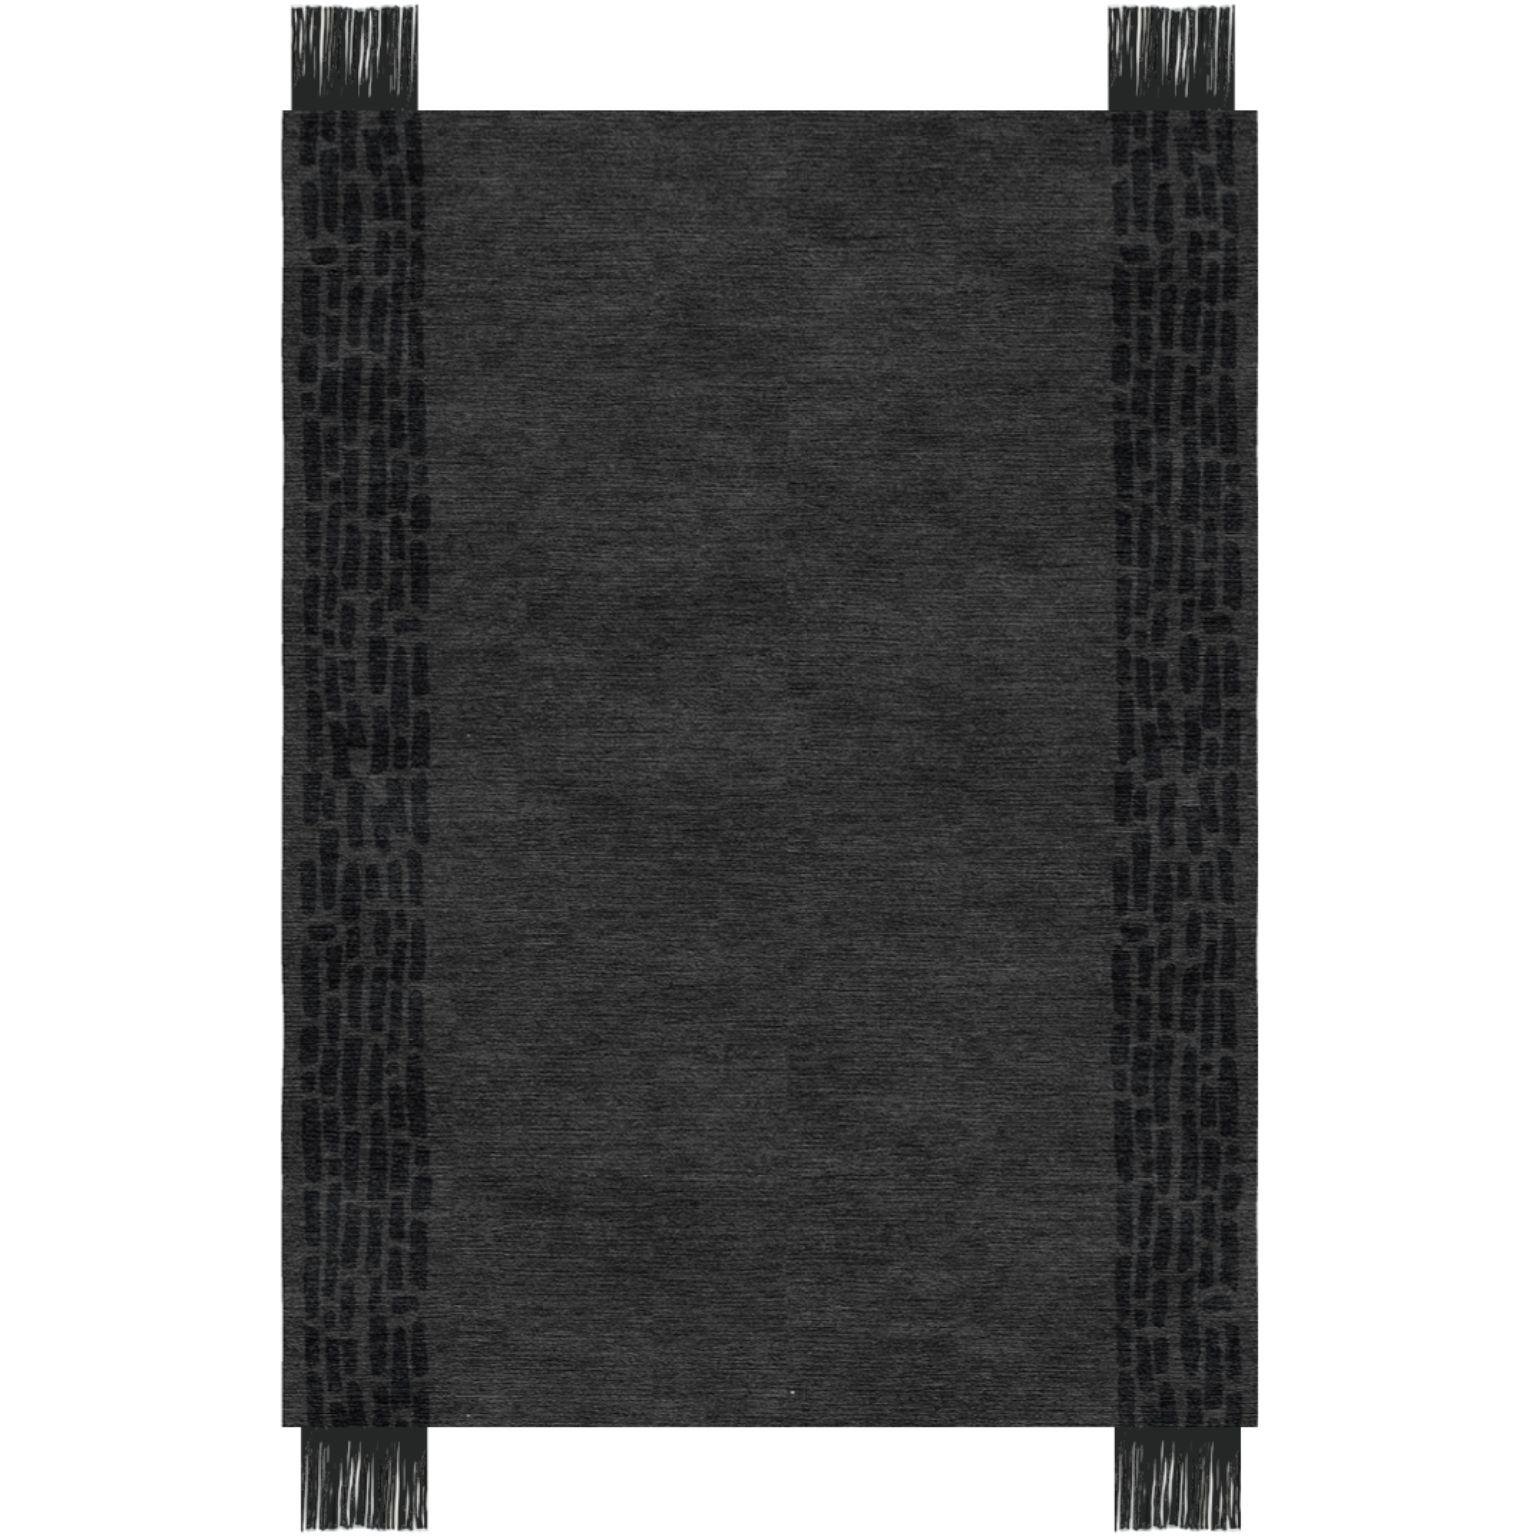 Roads large rug by Art & Loom
Dimensions: D304.8 x H426.7 cm
Materials: Allo & Chinese silk with fringe—(2) pile heights
Quality (Knots per Inch): 100
Also available in different dimensions.

Samantha Gallacher has always had a keen eye for